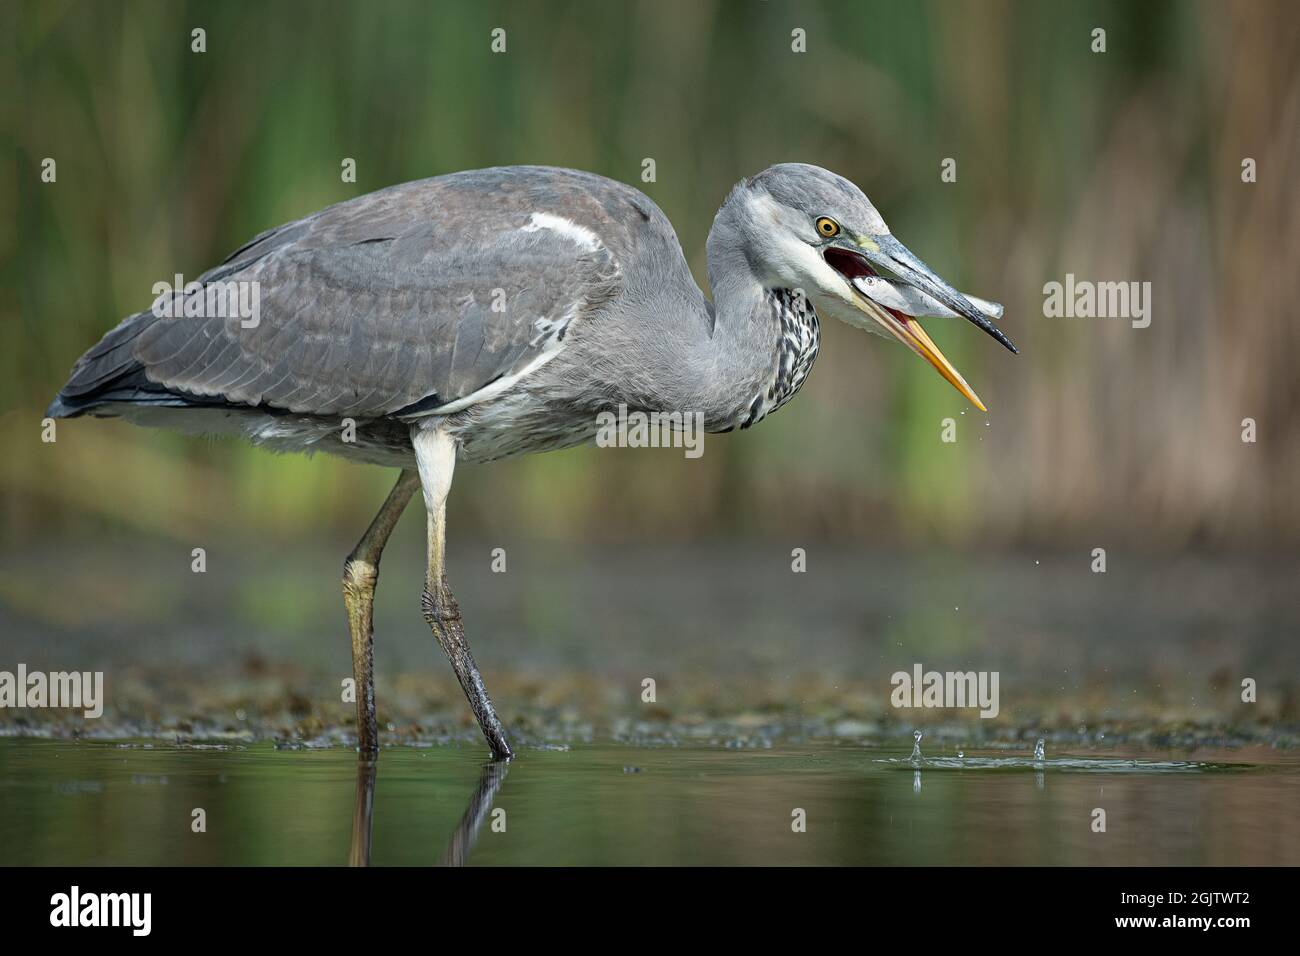 a close up of a grey, gray heron standing in the water with a fish in its beak Stock Photo